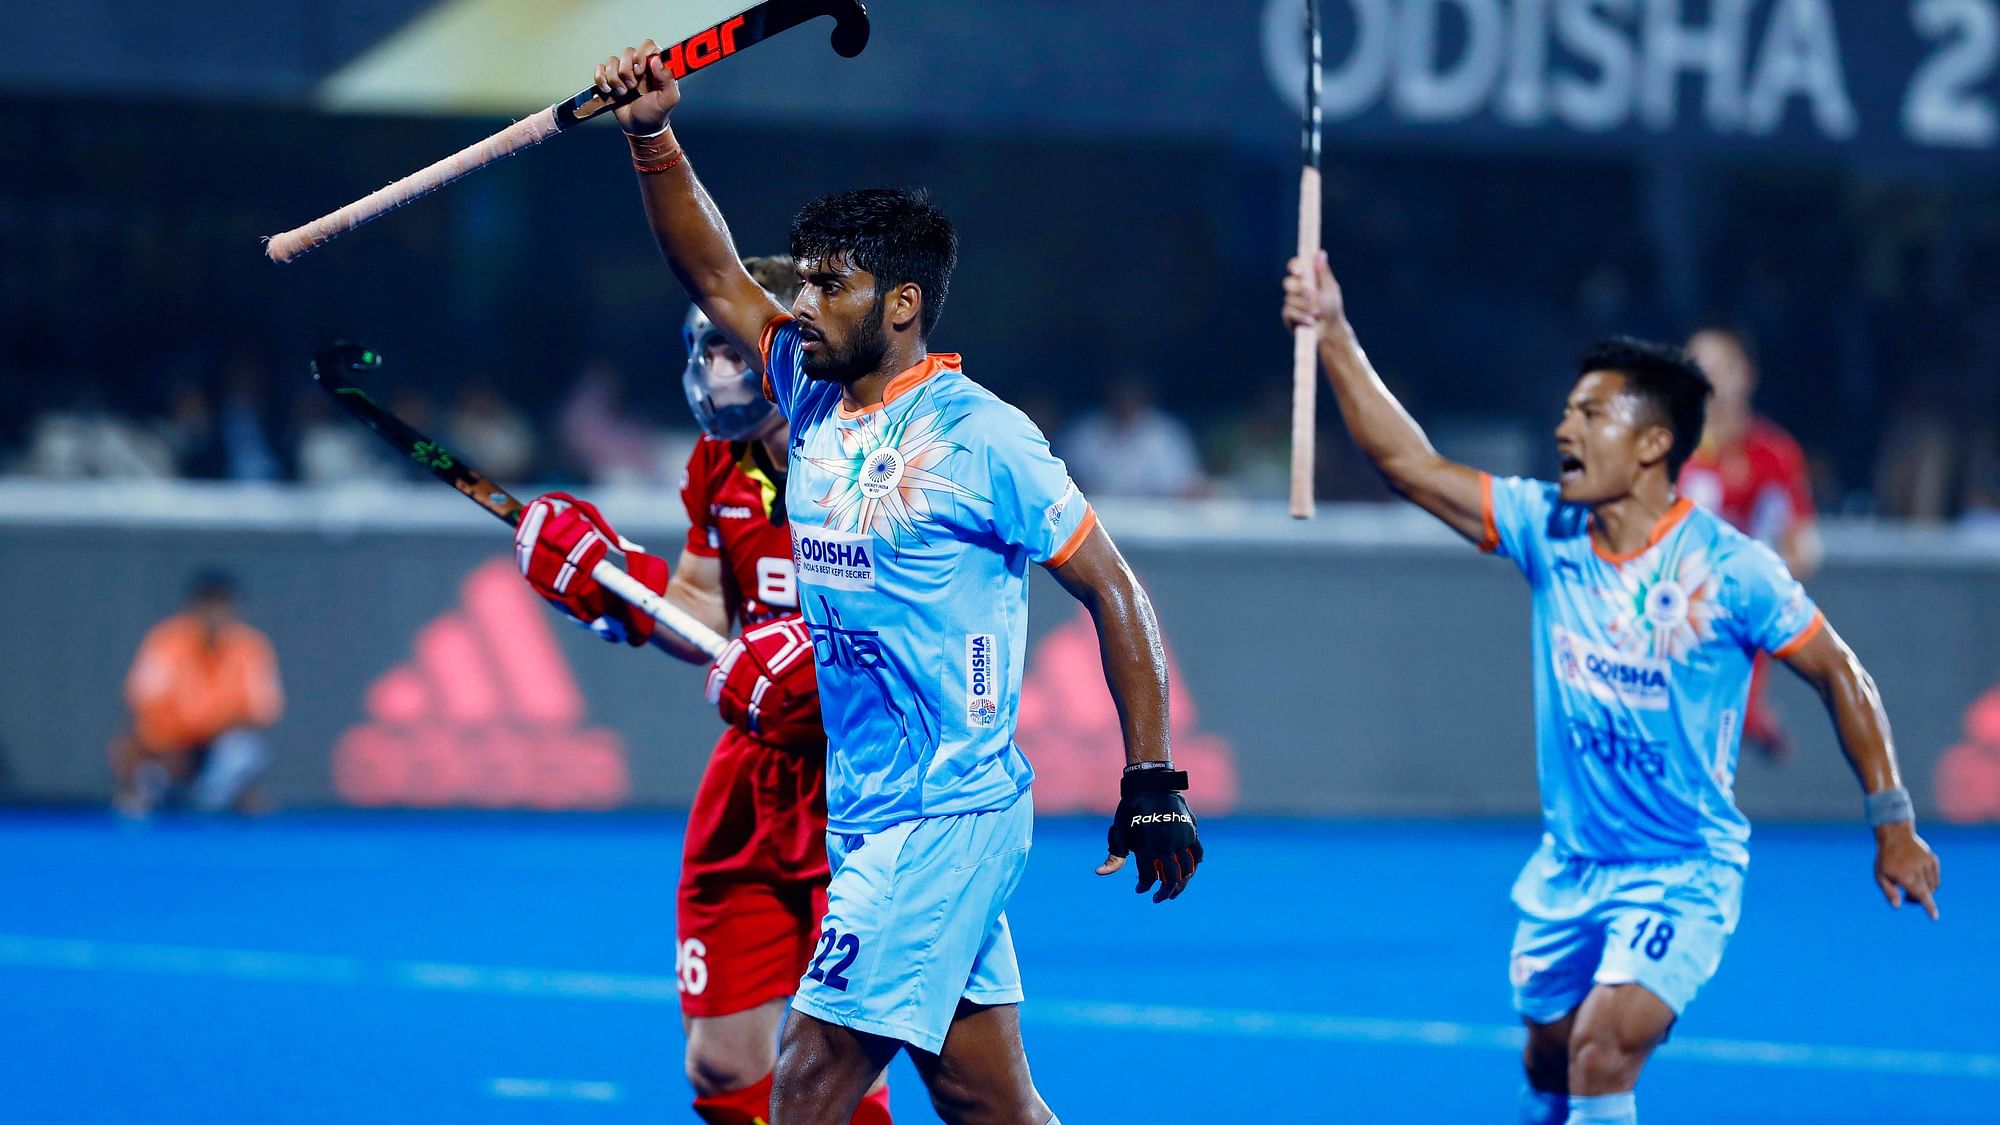 India held Belgium to a 2-2 draw in their second Pool C match at the Hockey World Cup.